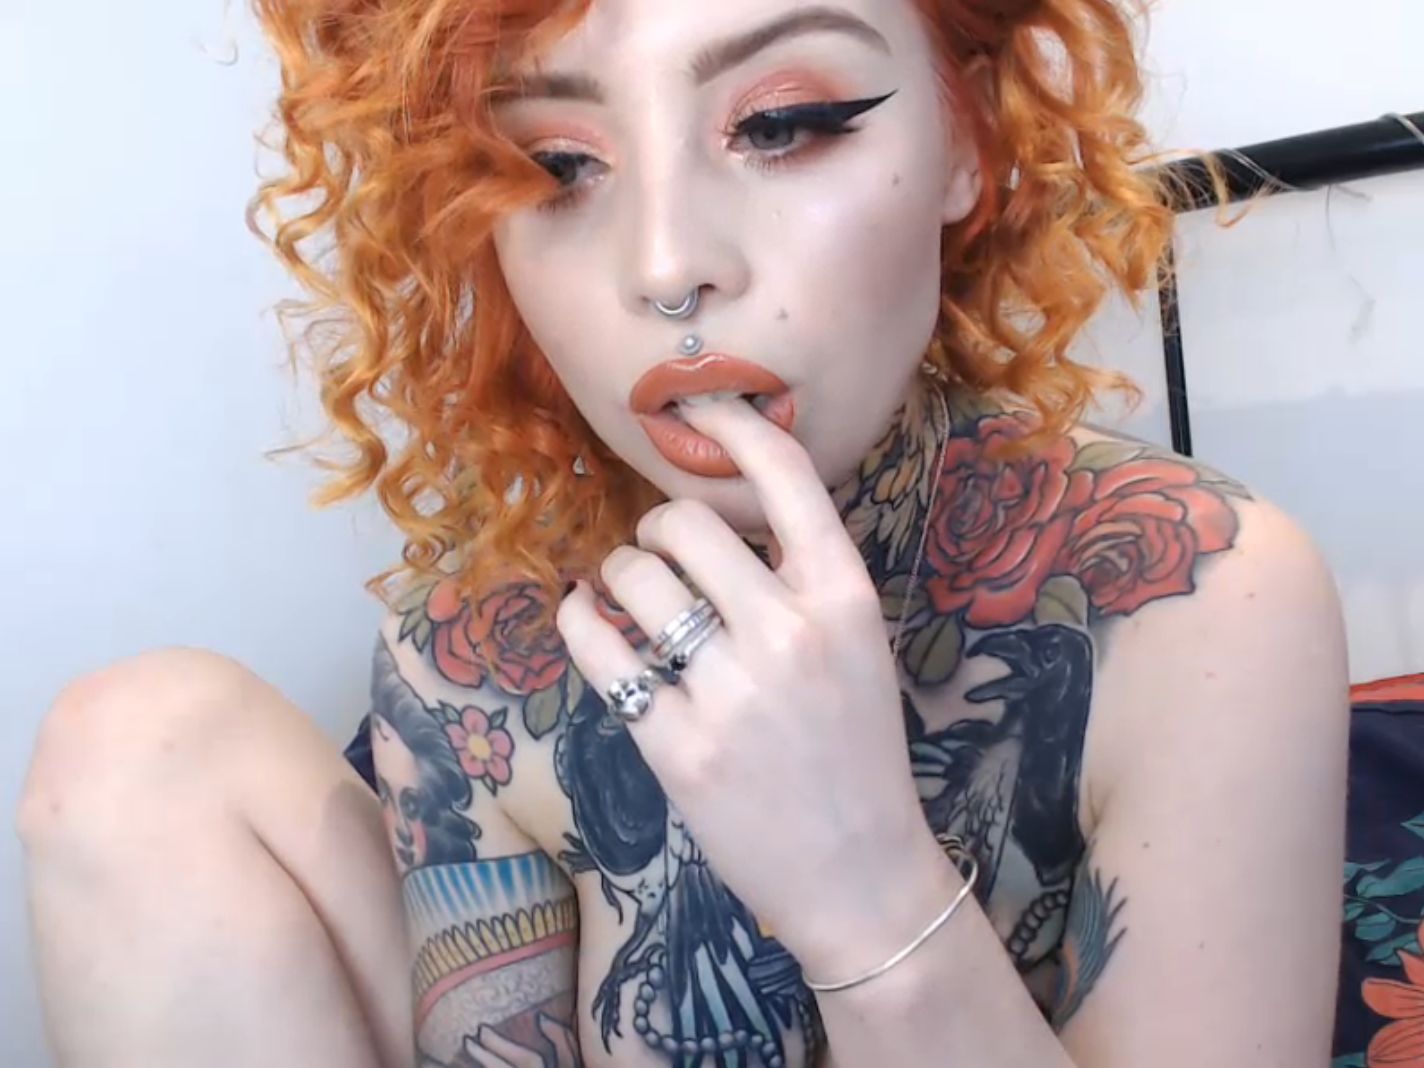 peachhes shows how tasty she can